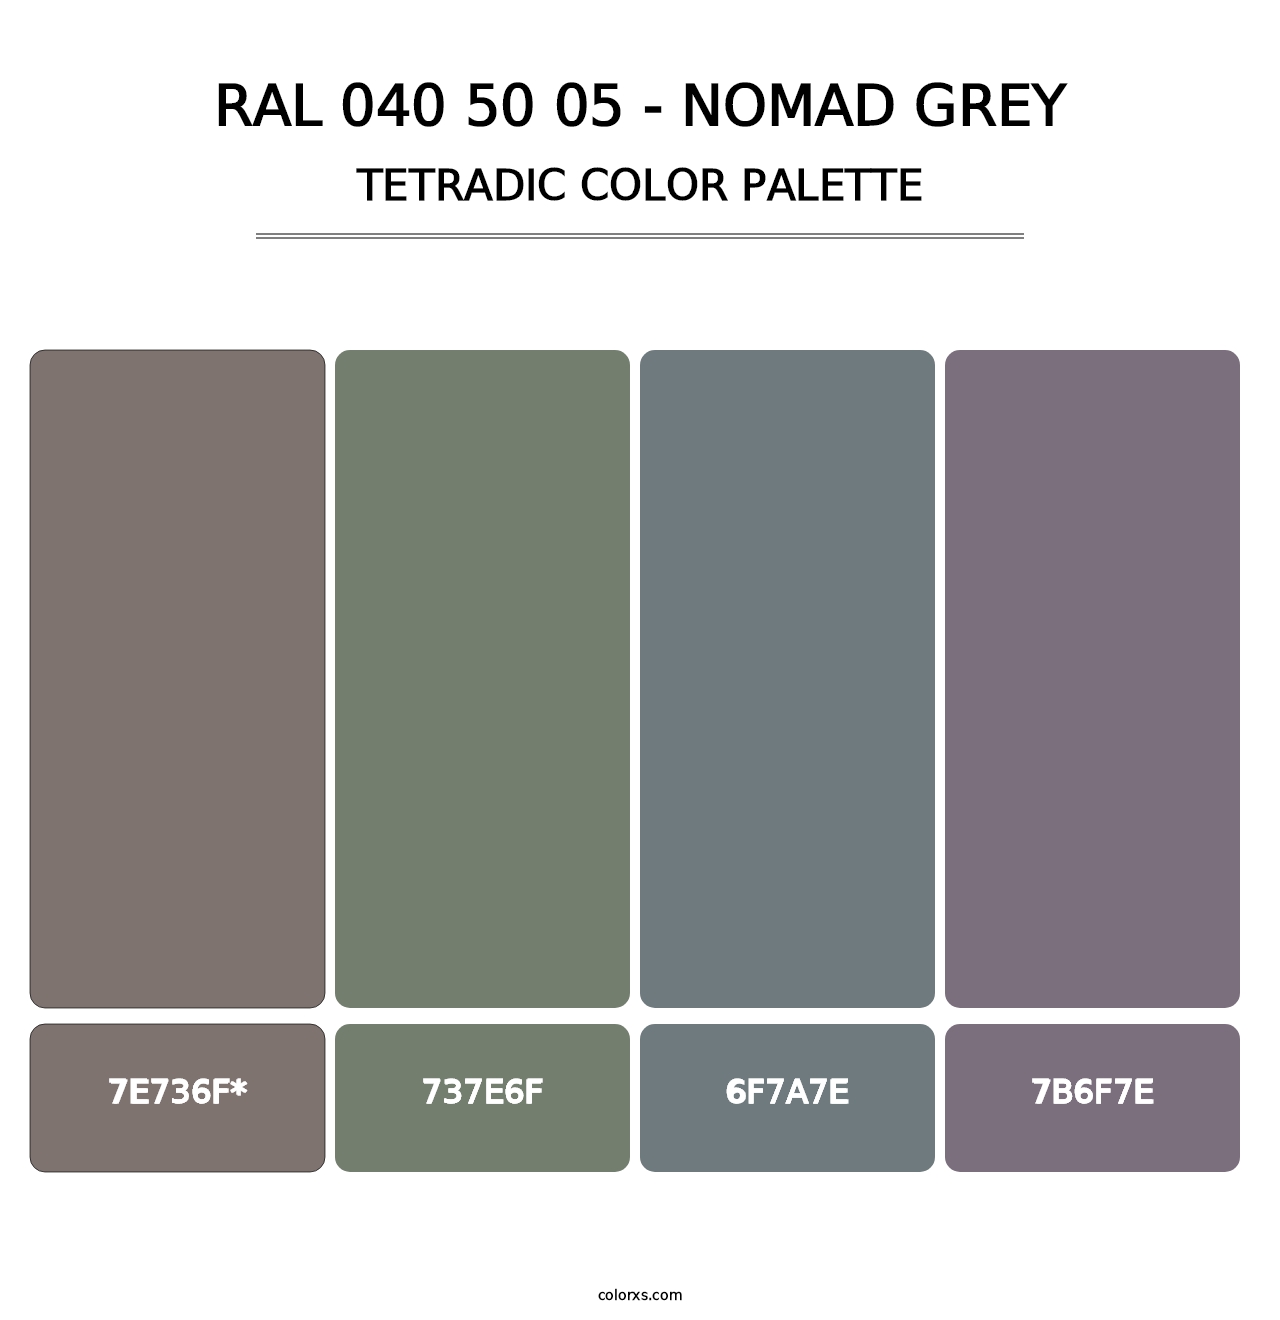 RAL 040 50 05 - Nomad Grey - Tetradic Color Palette